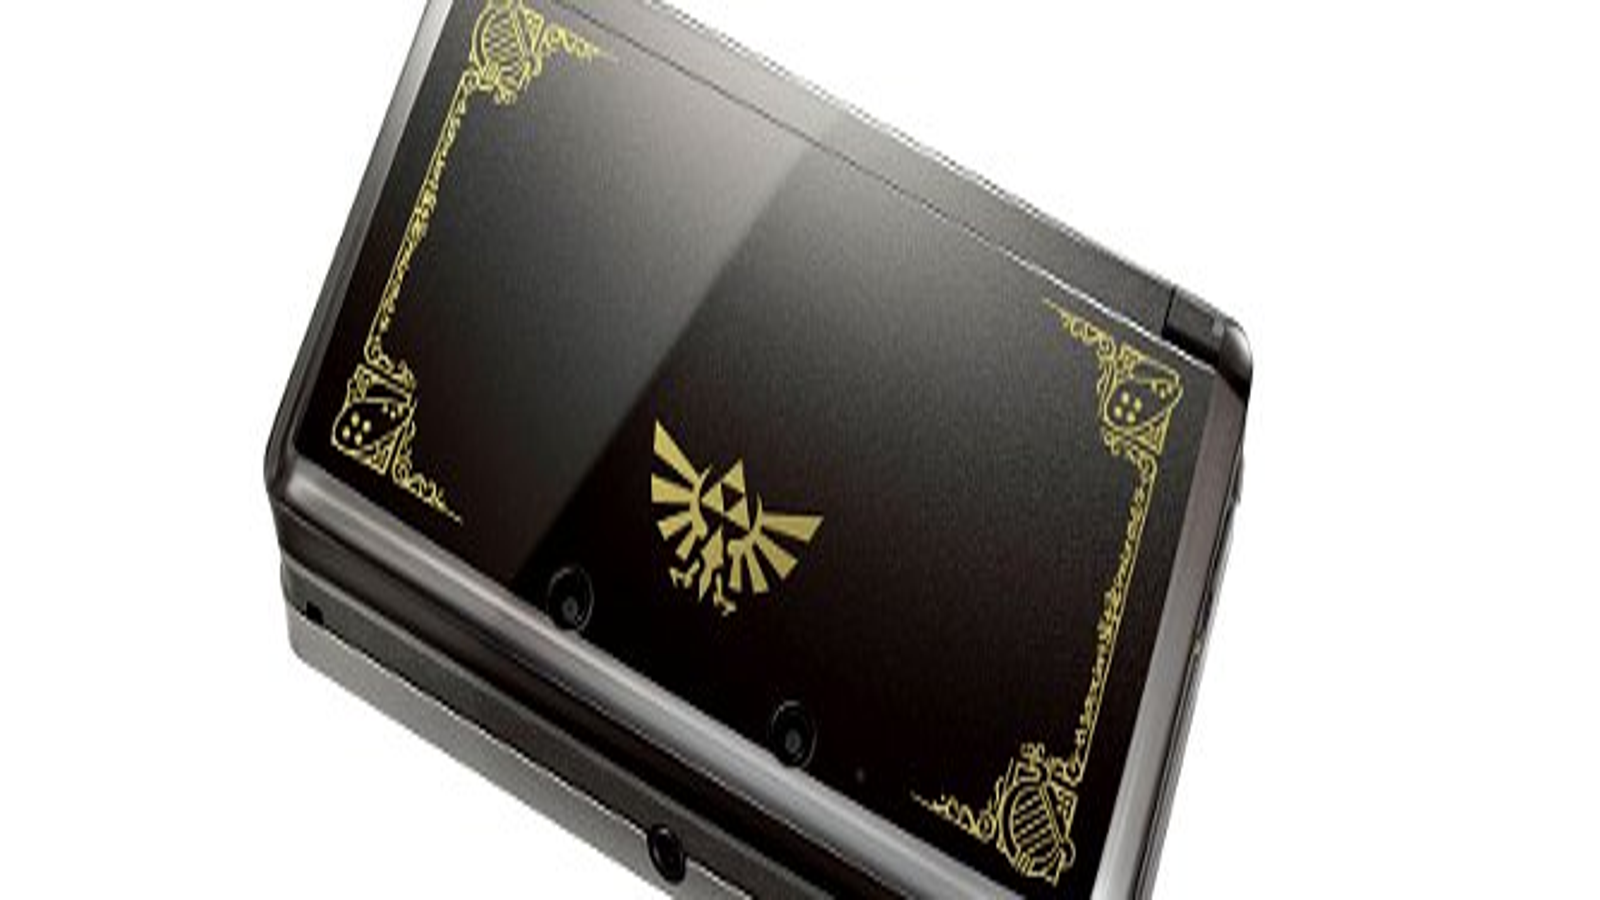 The Legend of Zelda 25th Anniversary Limited Edition is heading to